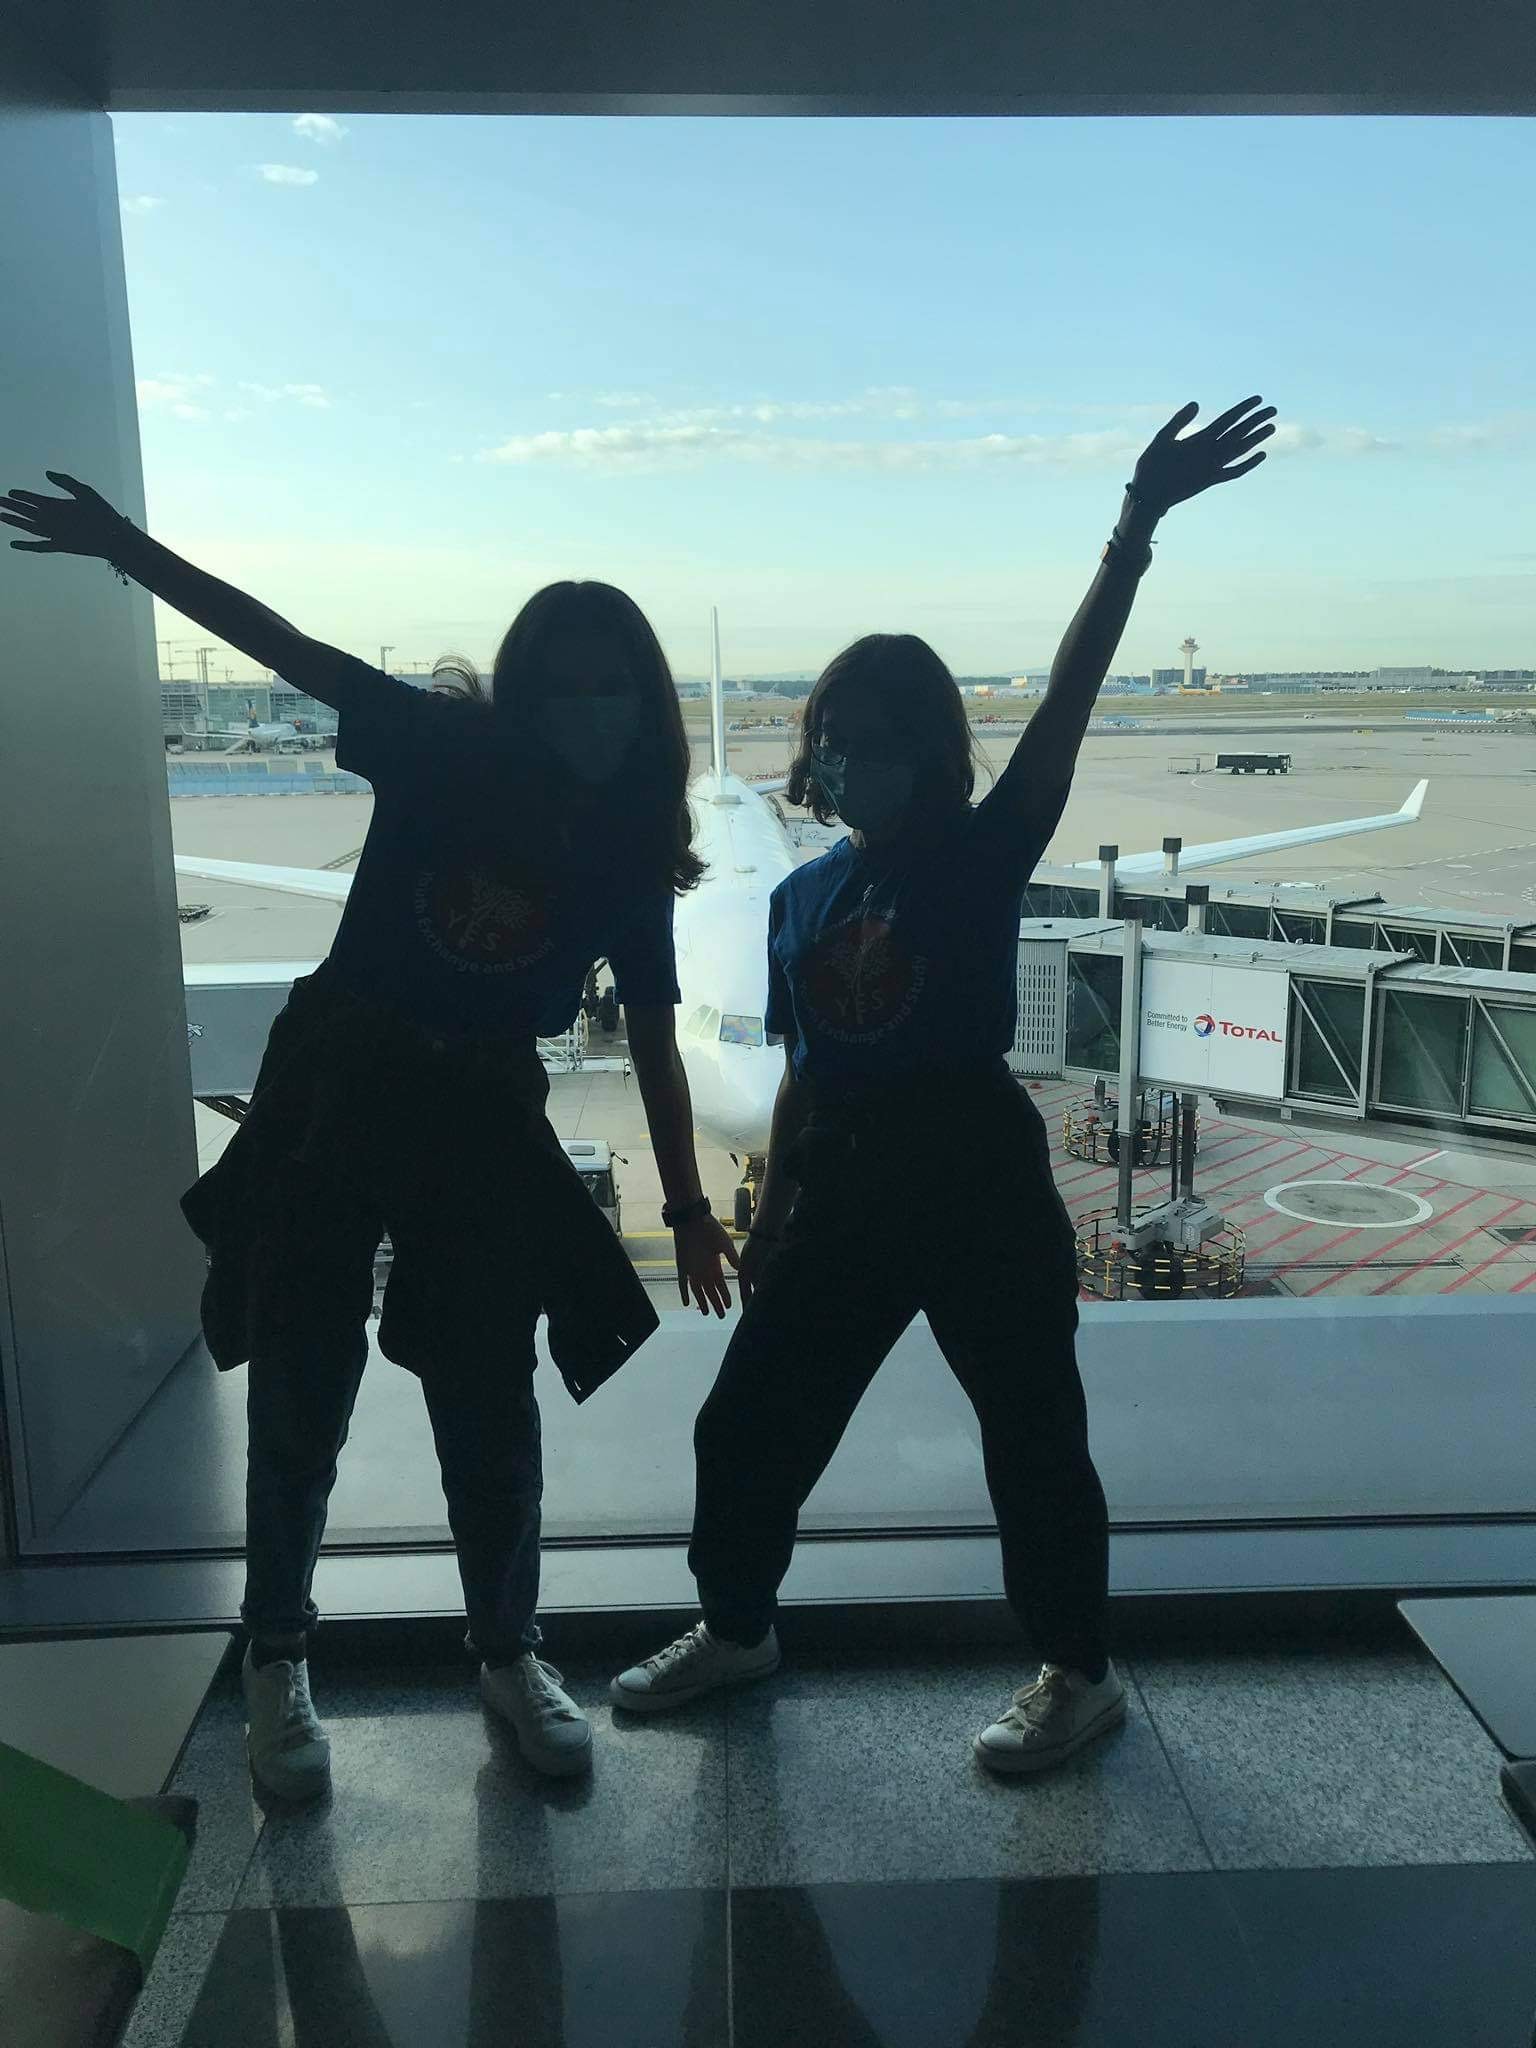 Two YES students' silhouettes in front of an airport window